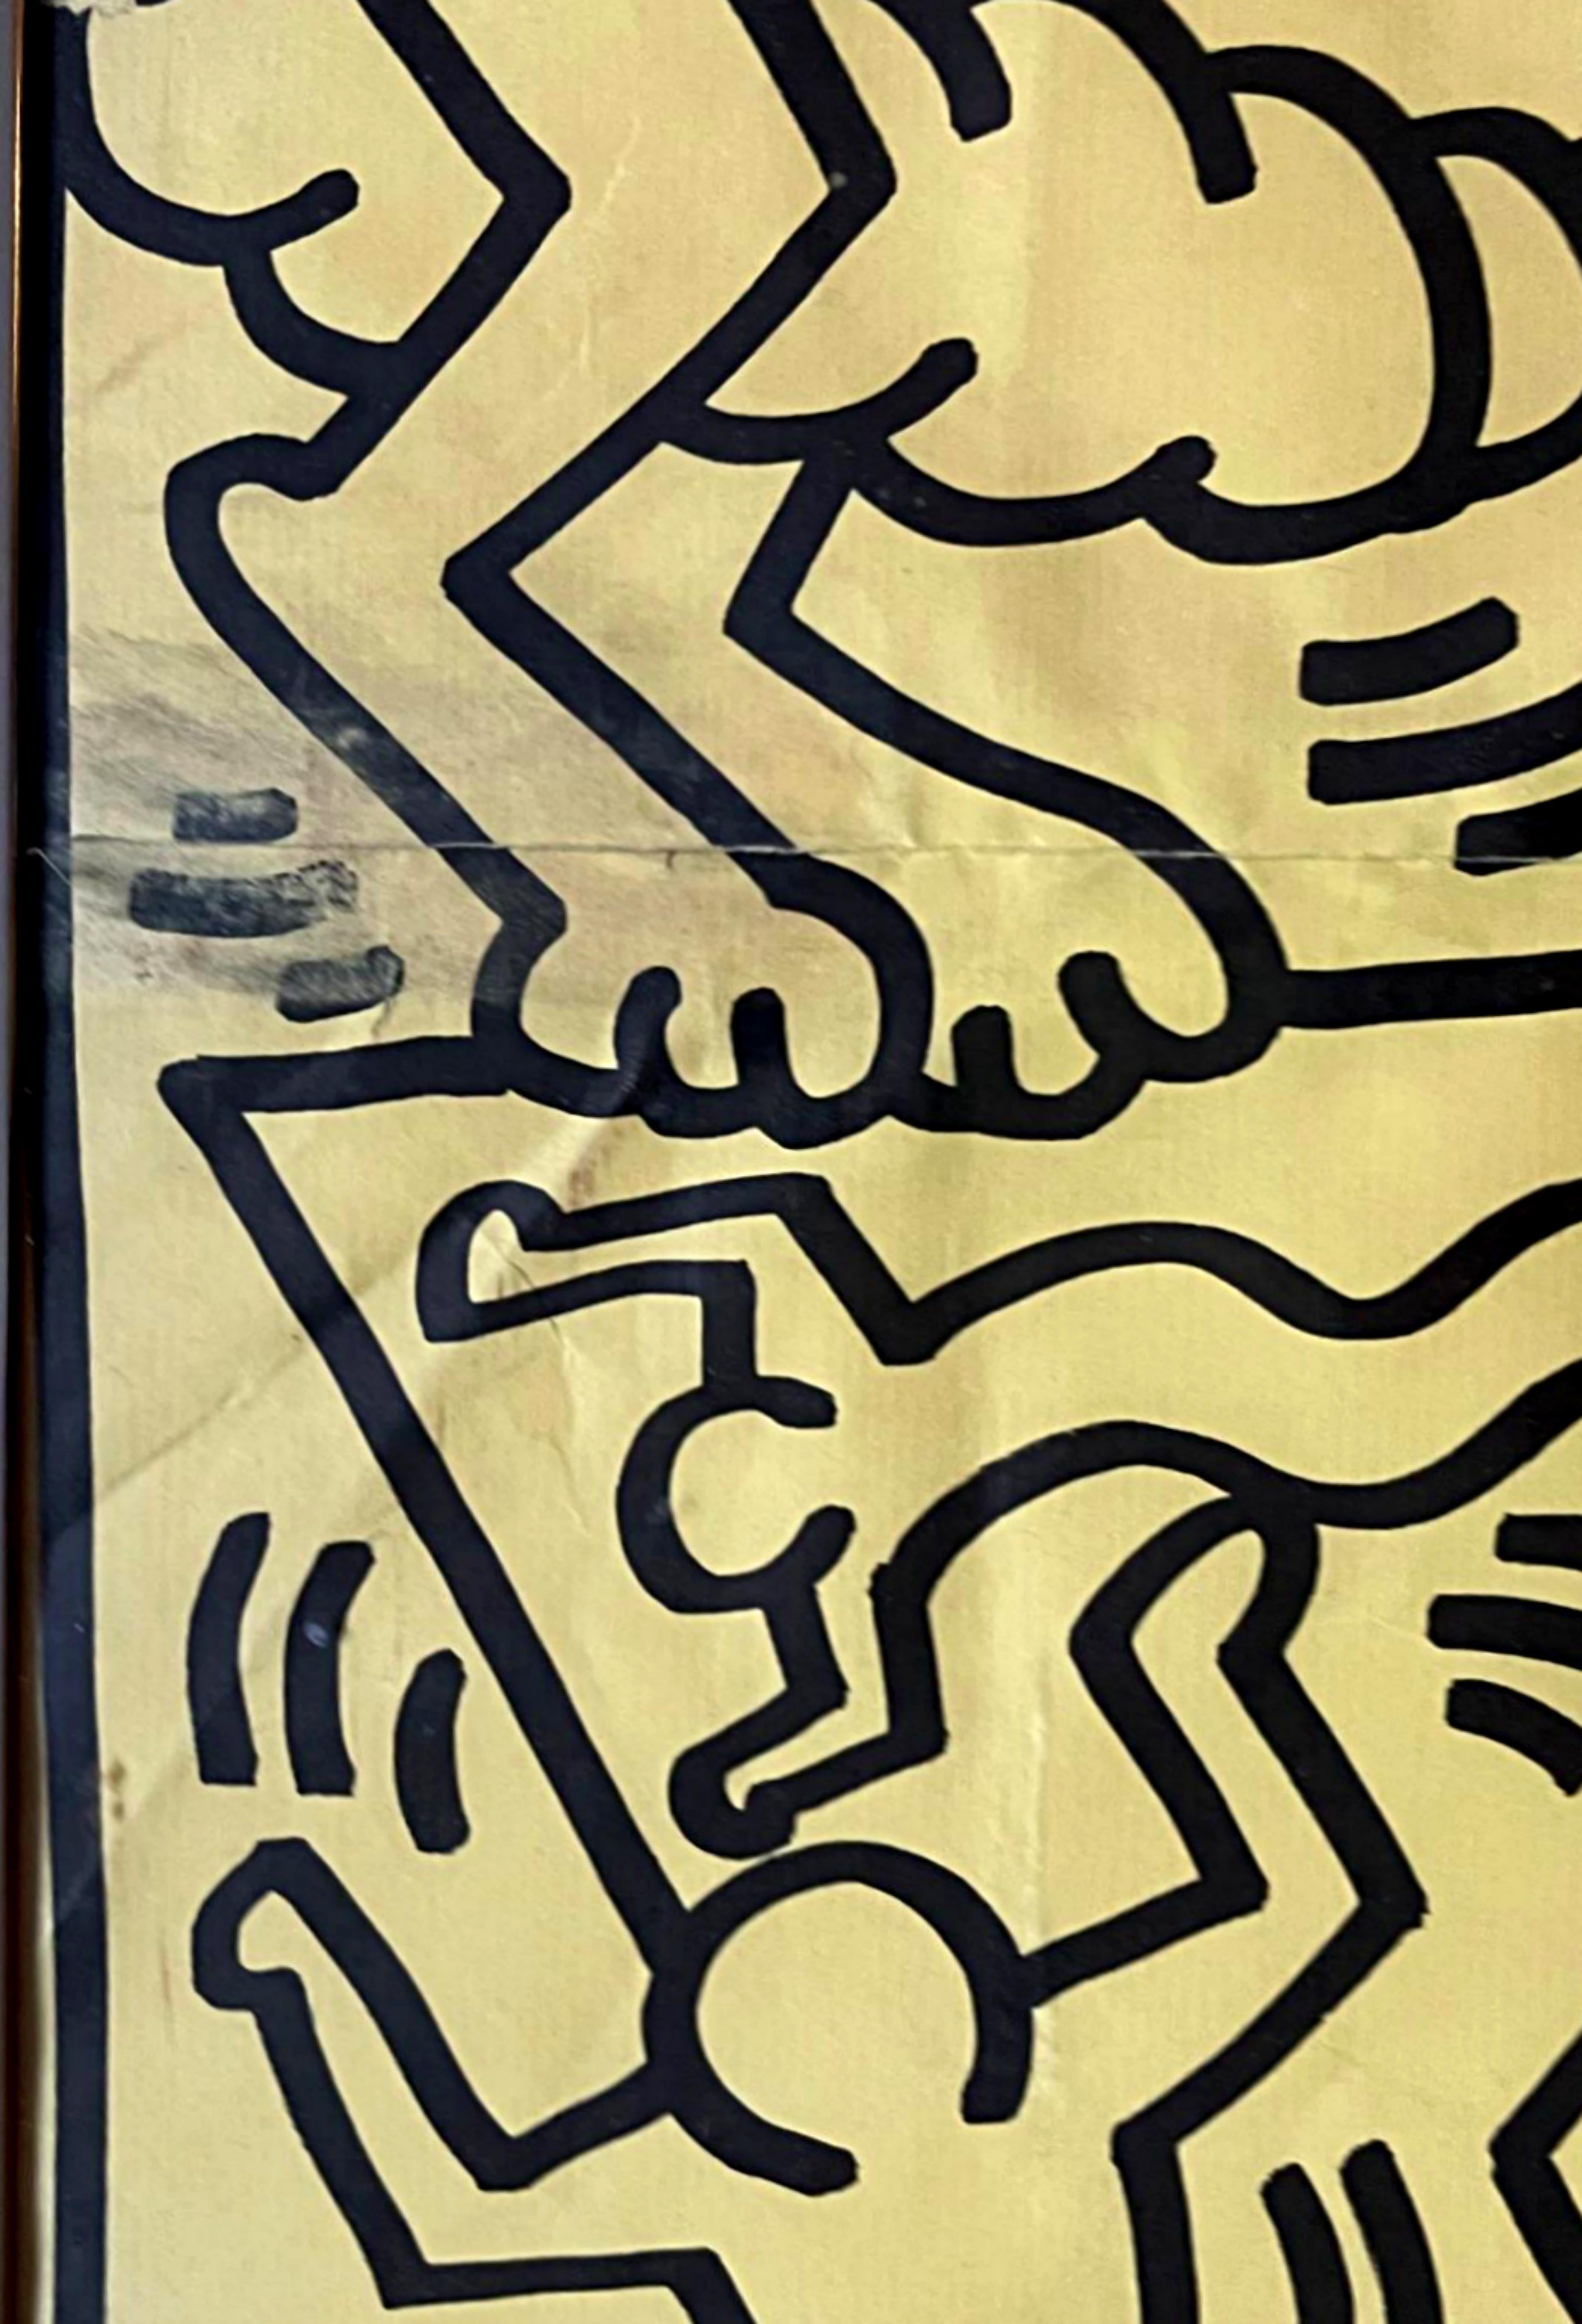 Keith Haring
Champions 1984 (Hand signed by Keith Haring), 1988
Offset lithograph (Hand signed and dated 1988 by Keith Haring with his logo)
Boldly signed and dated '88 by Keith Haring with his distinctive logo in black marker under his printed